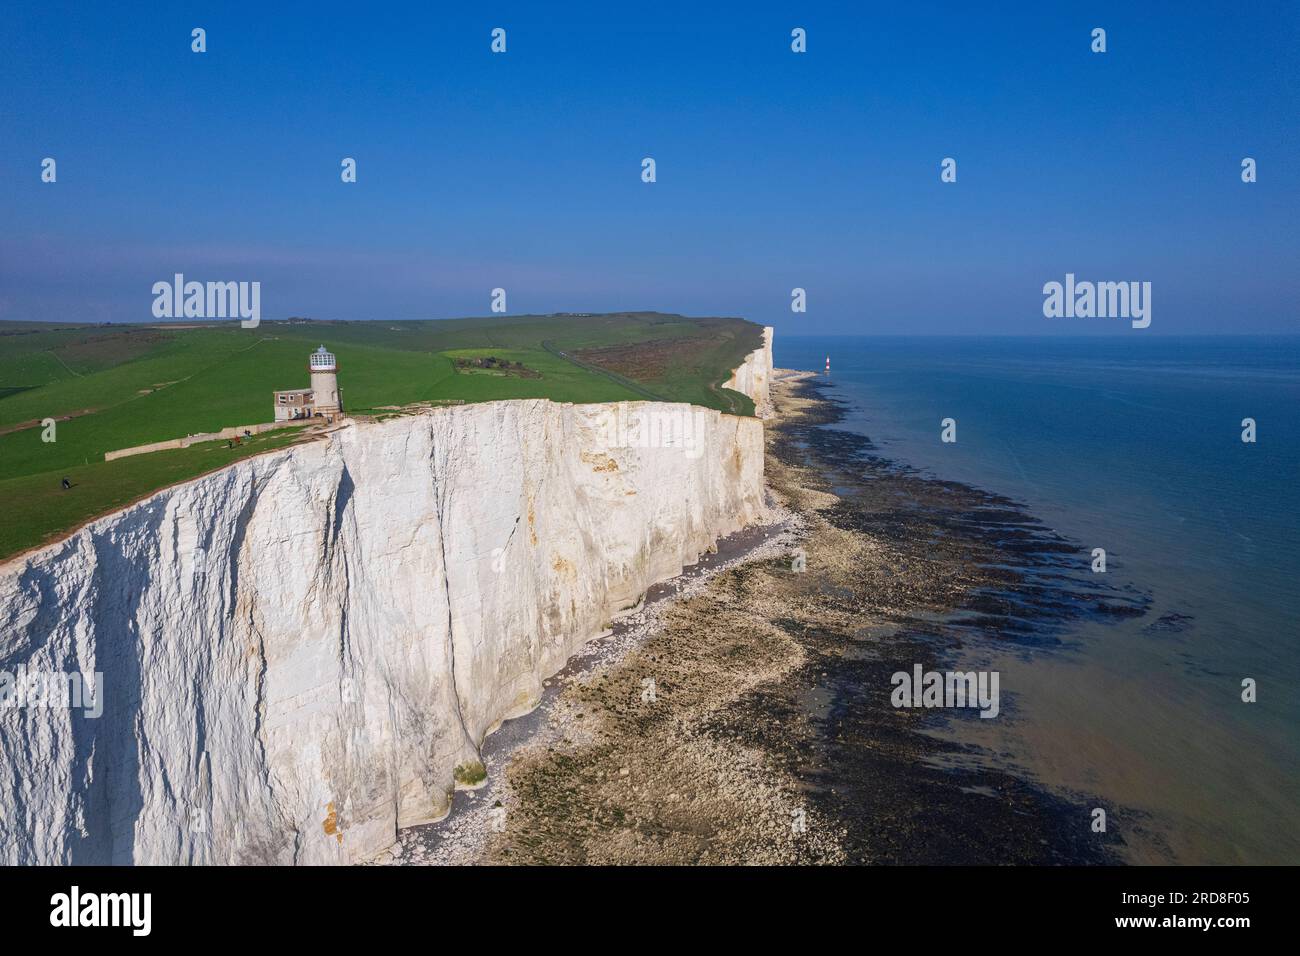 View from drone of Belle Tout lighthouse at low tide, Seven Sisters chalk cliffs, South Downs National Park, East Sussex, England Stock Photo